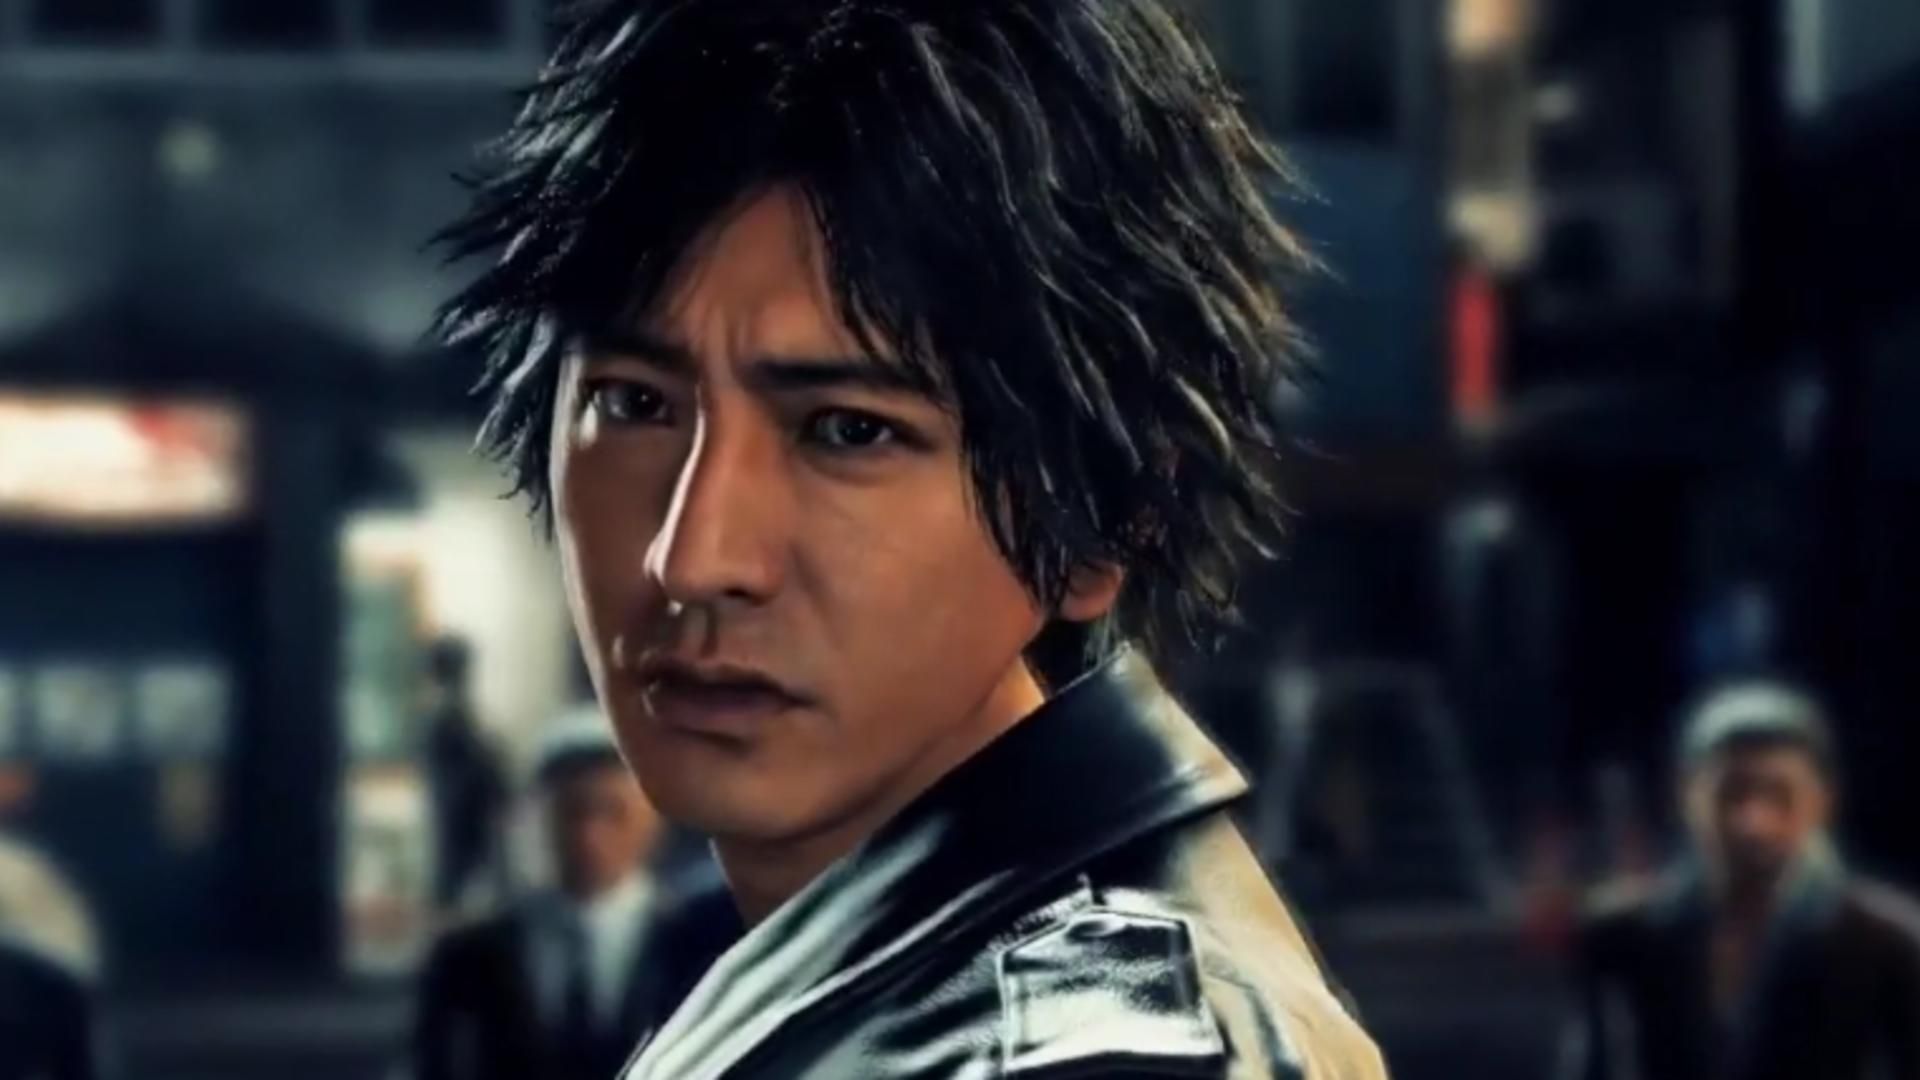 Judge Eyes Now Called Judgment, Will be Fully Dubbed When it Comes West in Summer 2019